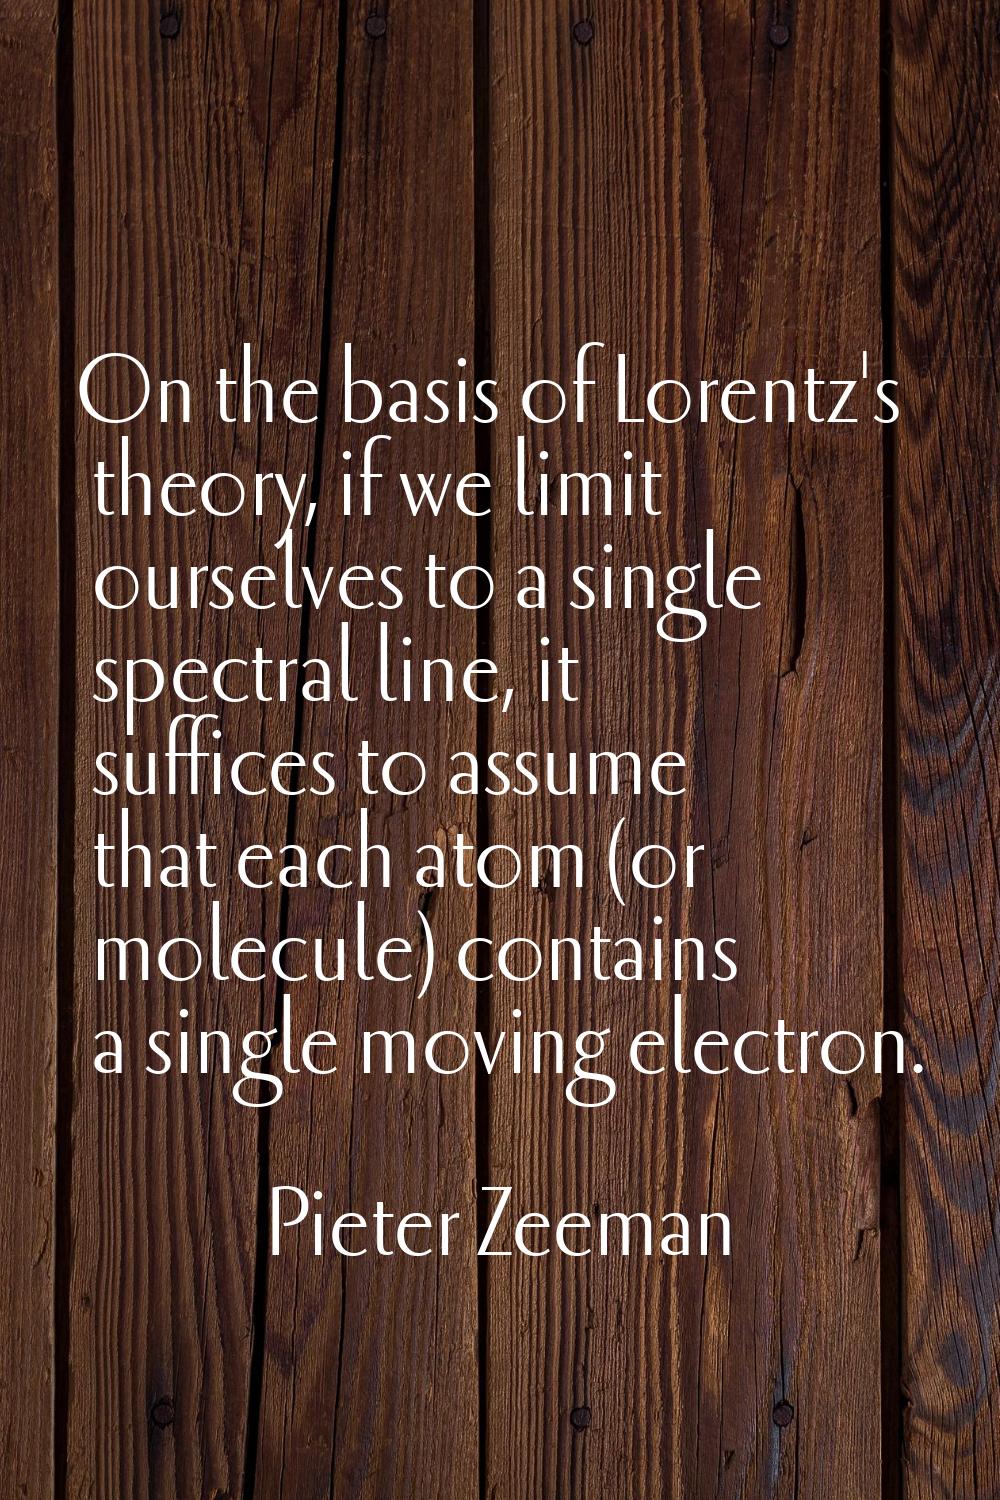 On the basis of Lorentz's theory, if we limit ourselves to a single spectral line, it suffices to a